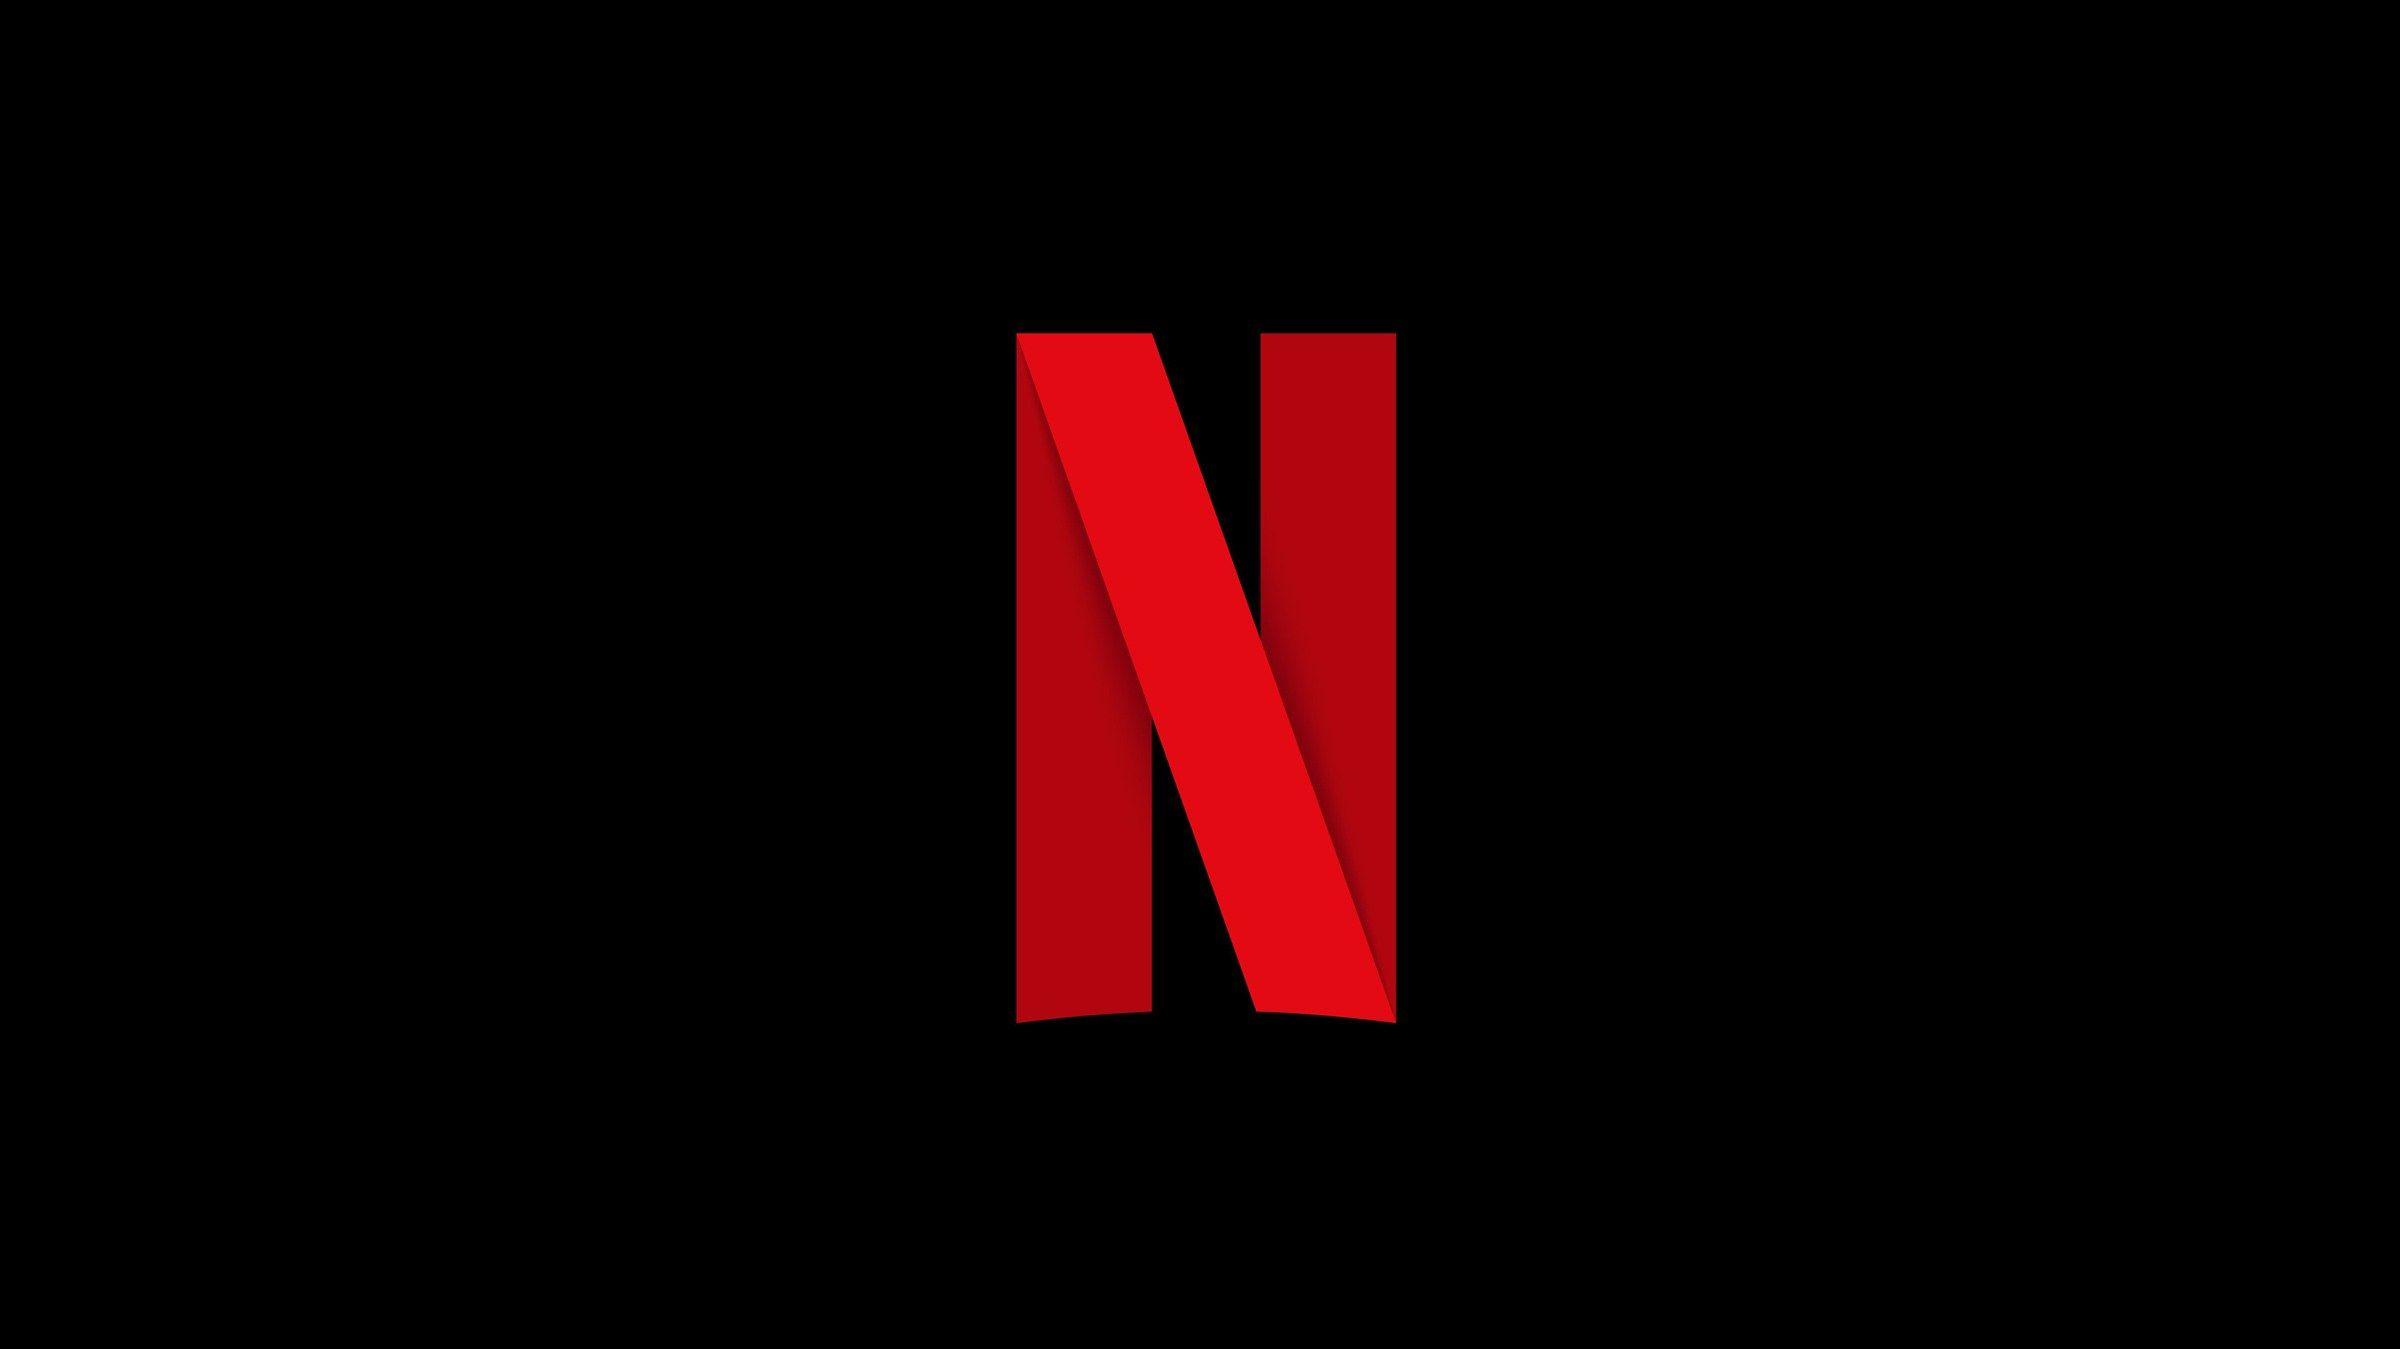 Netflix Cool Logo - Infographic: Netflix's New 'N' and the State of Logo Design | WIRED